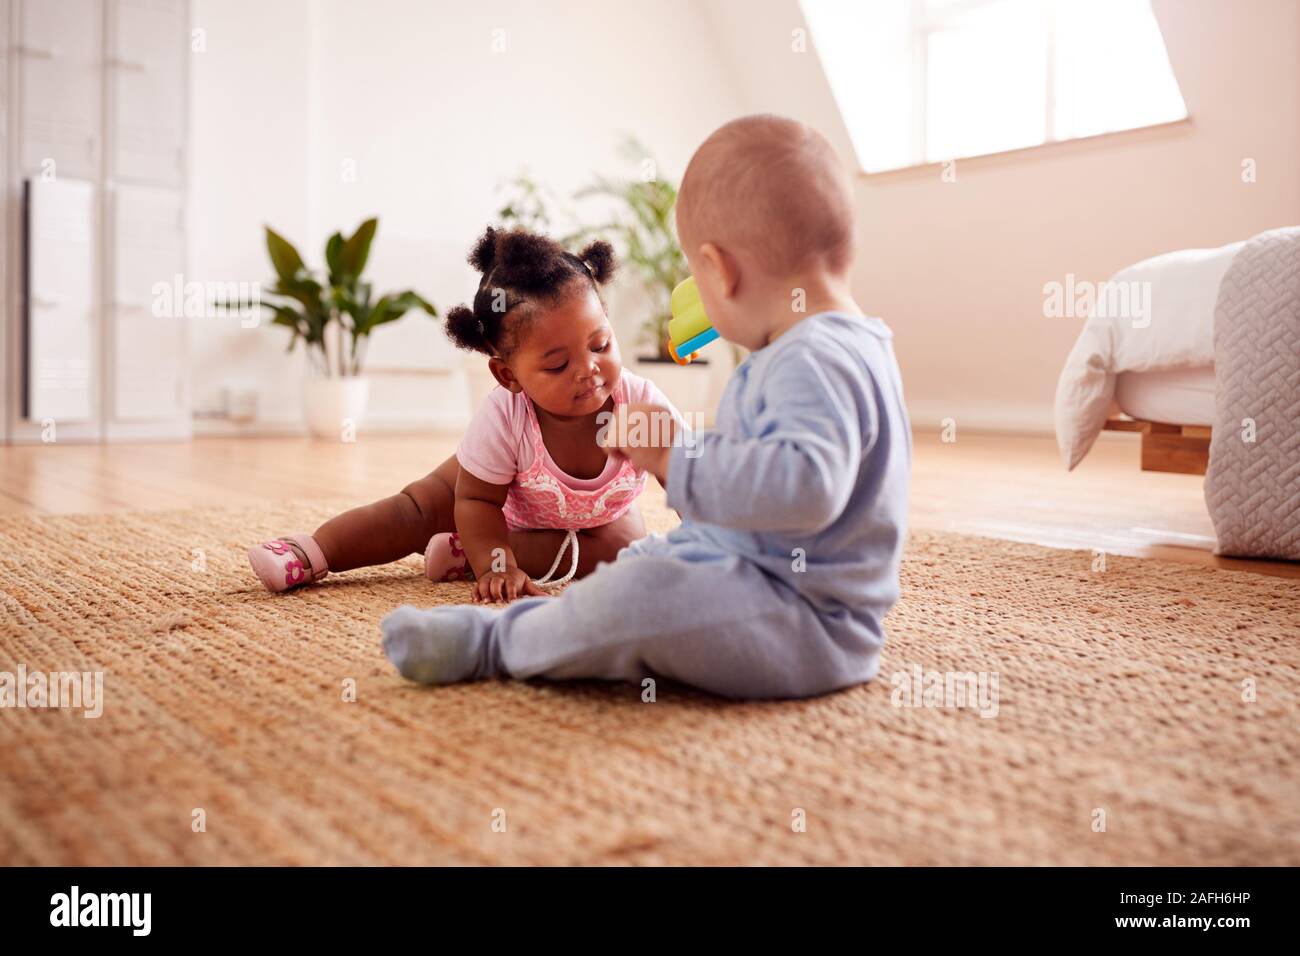 Baby Boy And Girl Playing With Toys On Rug At Home Together Stock Photo